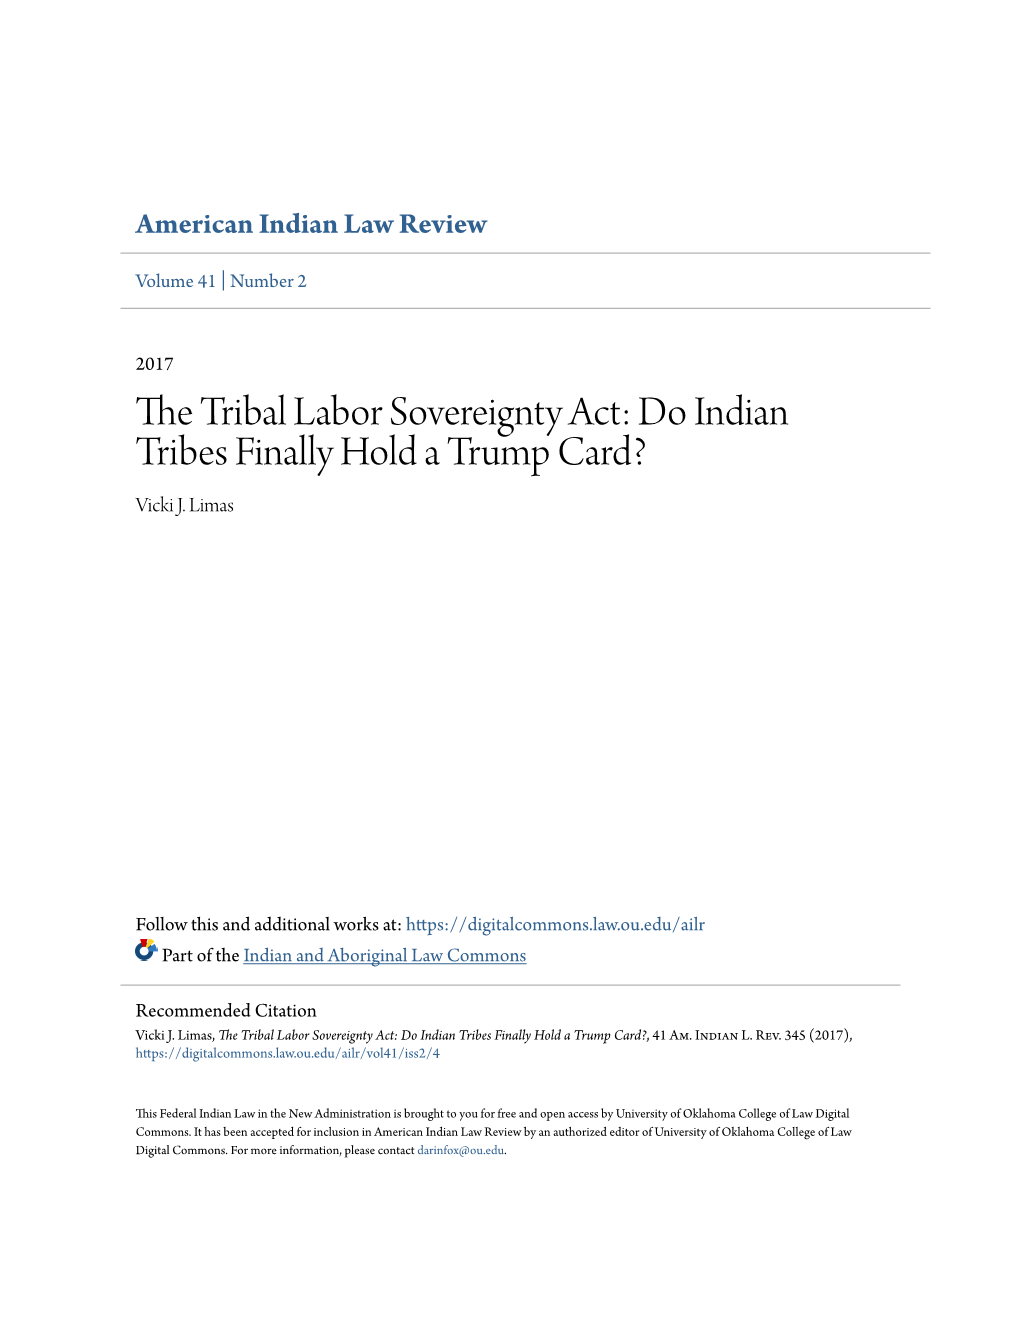 The Tribal Labor Sovereignty Act: Do Indian Tribes Finally Hold a Trump Card?, 41 Am